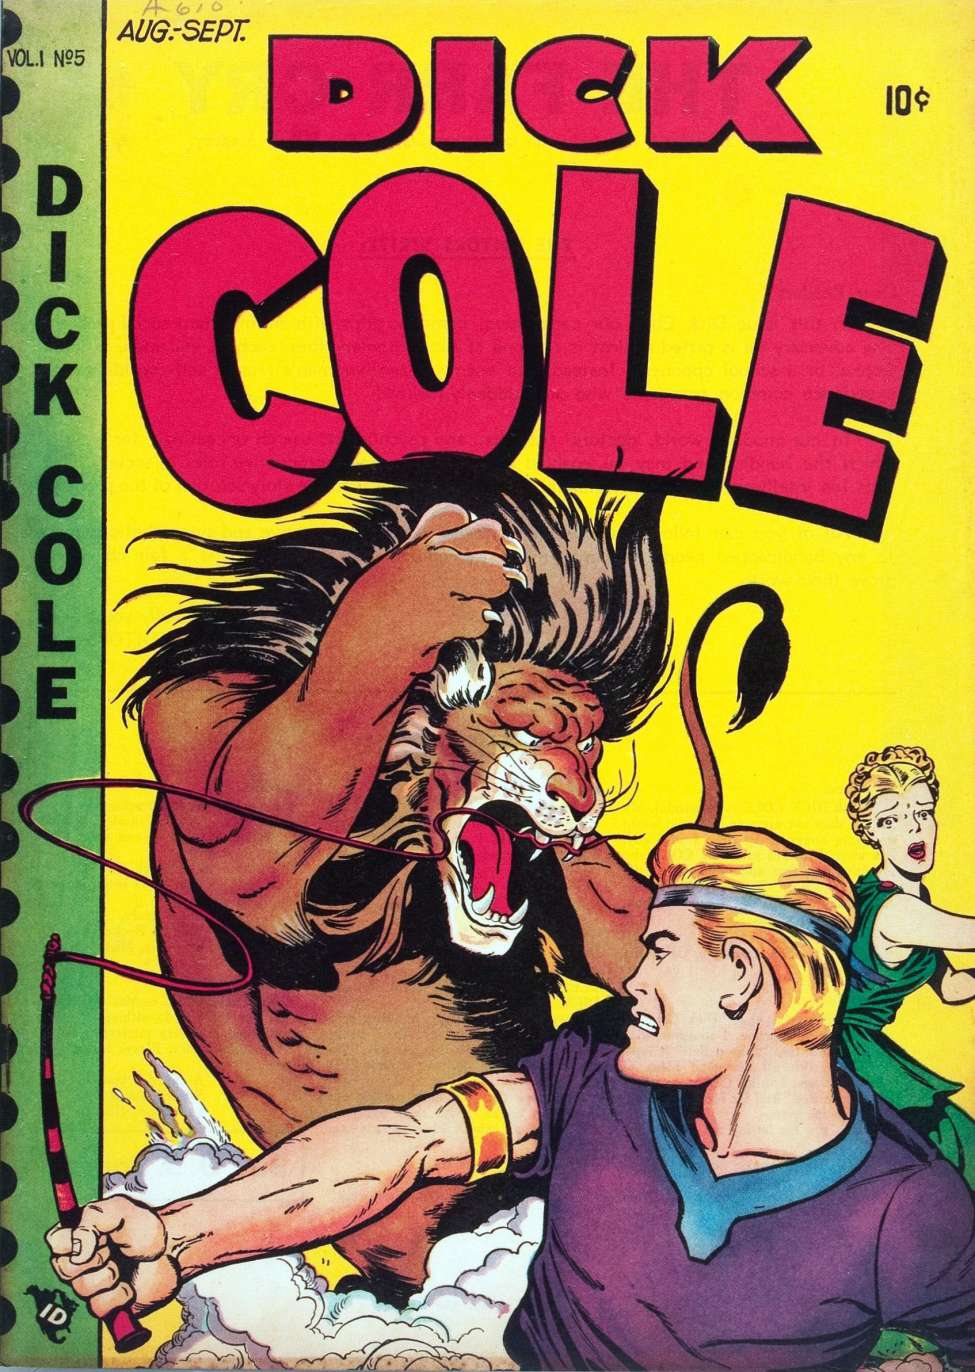 Book Cover For Dick Cole 5 - Version 1